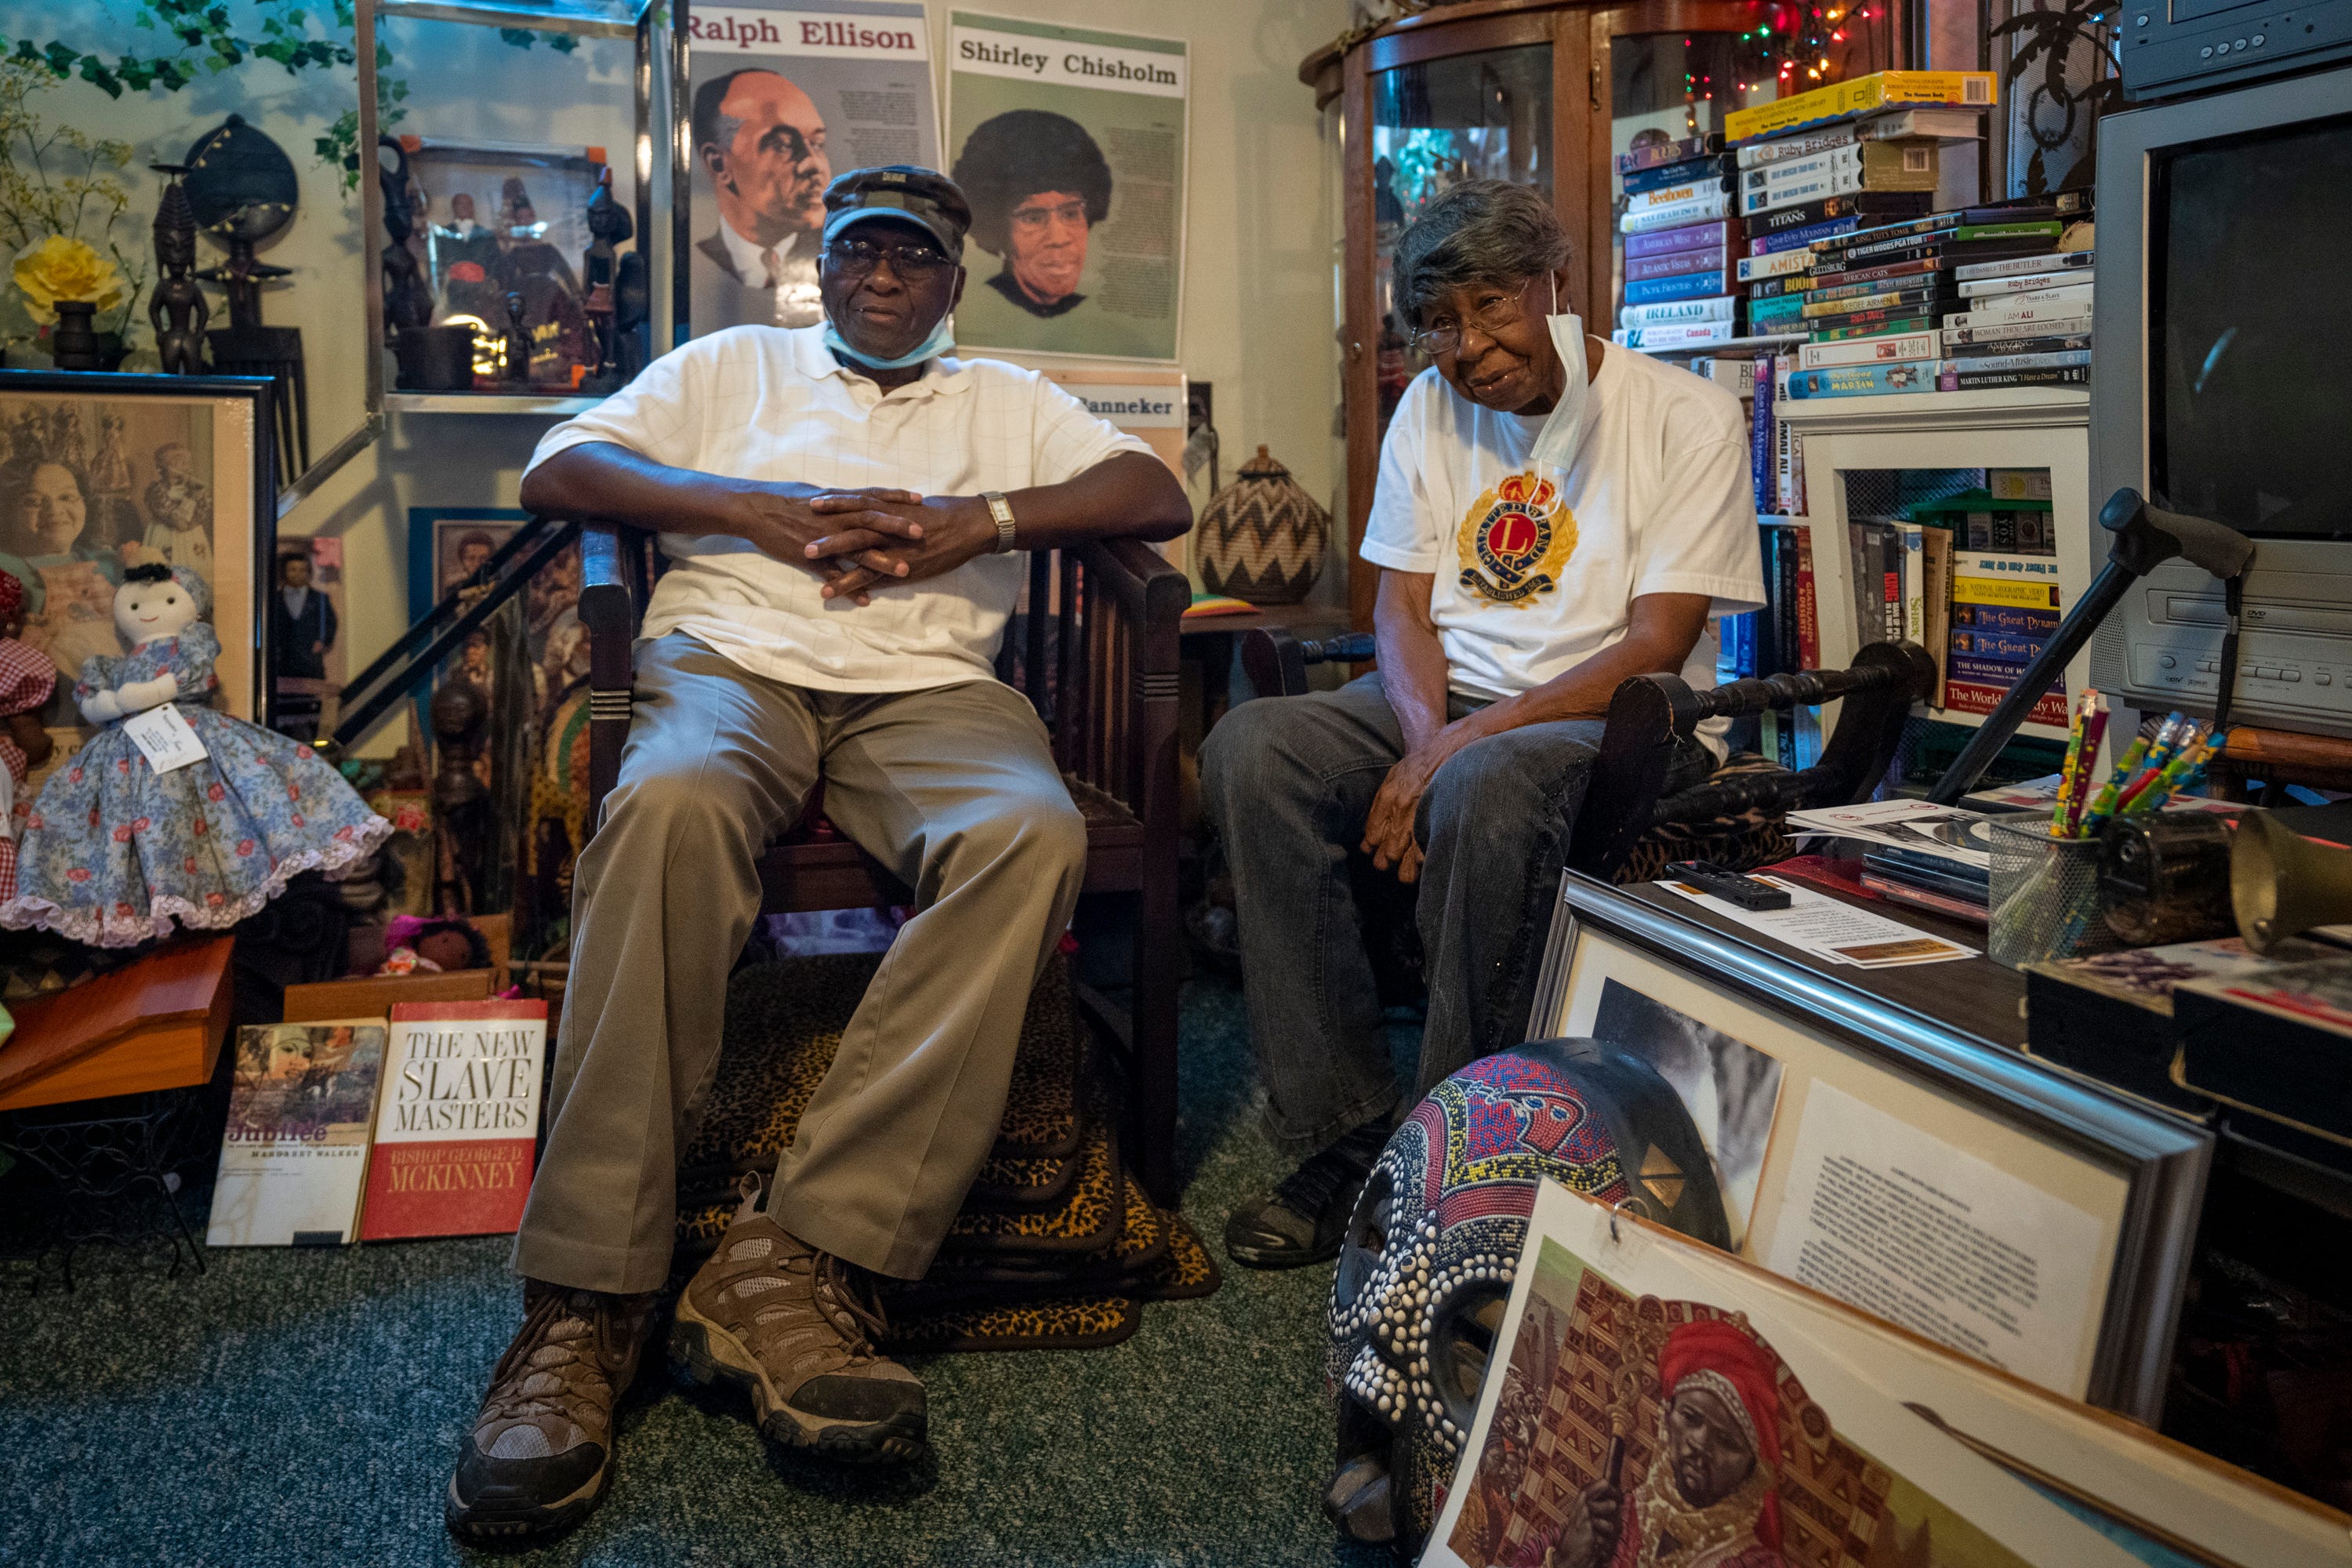 Robert "Bobby" Talbert, left, who was arrested along with Brenda Travis and Ike Lewis for sitting in the white-only section of the Greyhound bus station, and Hilda Casin, right, founder of the Black History Gallery, sit together in one of the gallery's several rooms packed with historical artifacts in McComb, Miss.